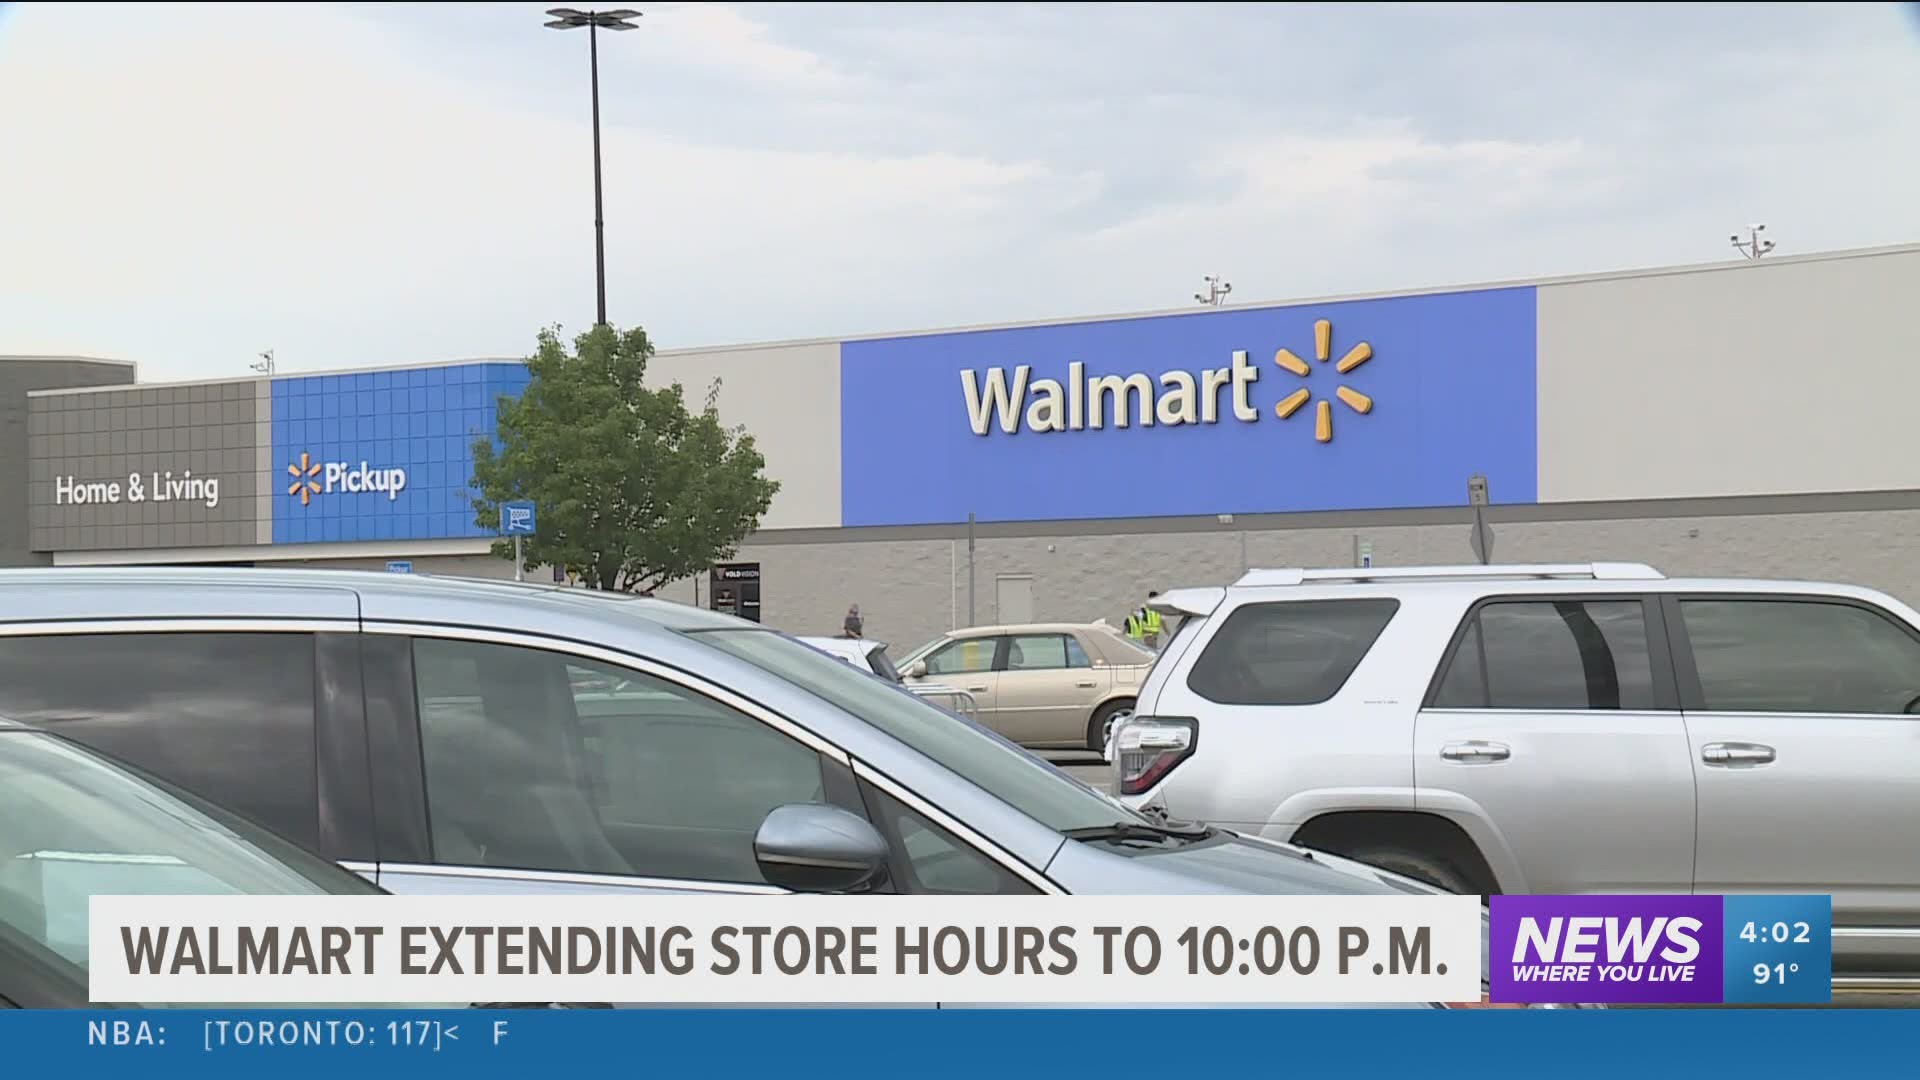 Walmart extending store hours to 10 p.m.